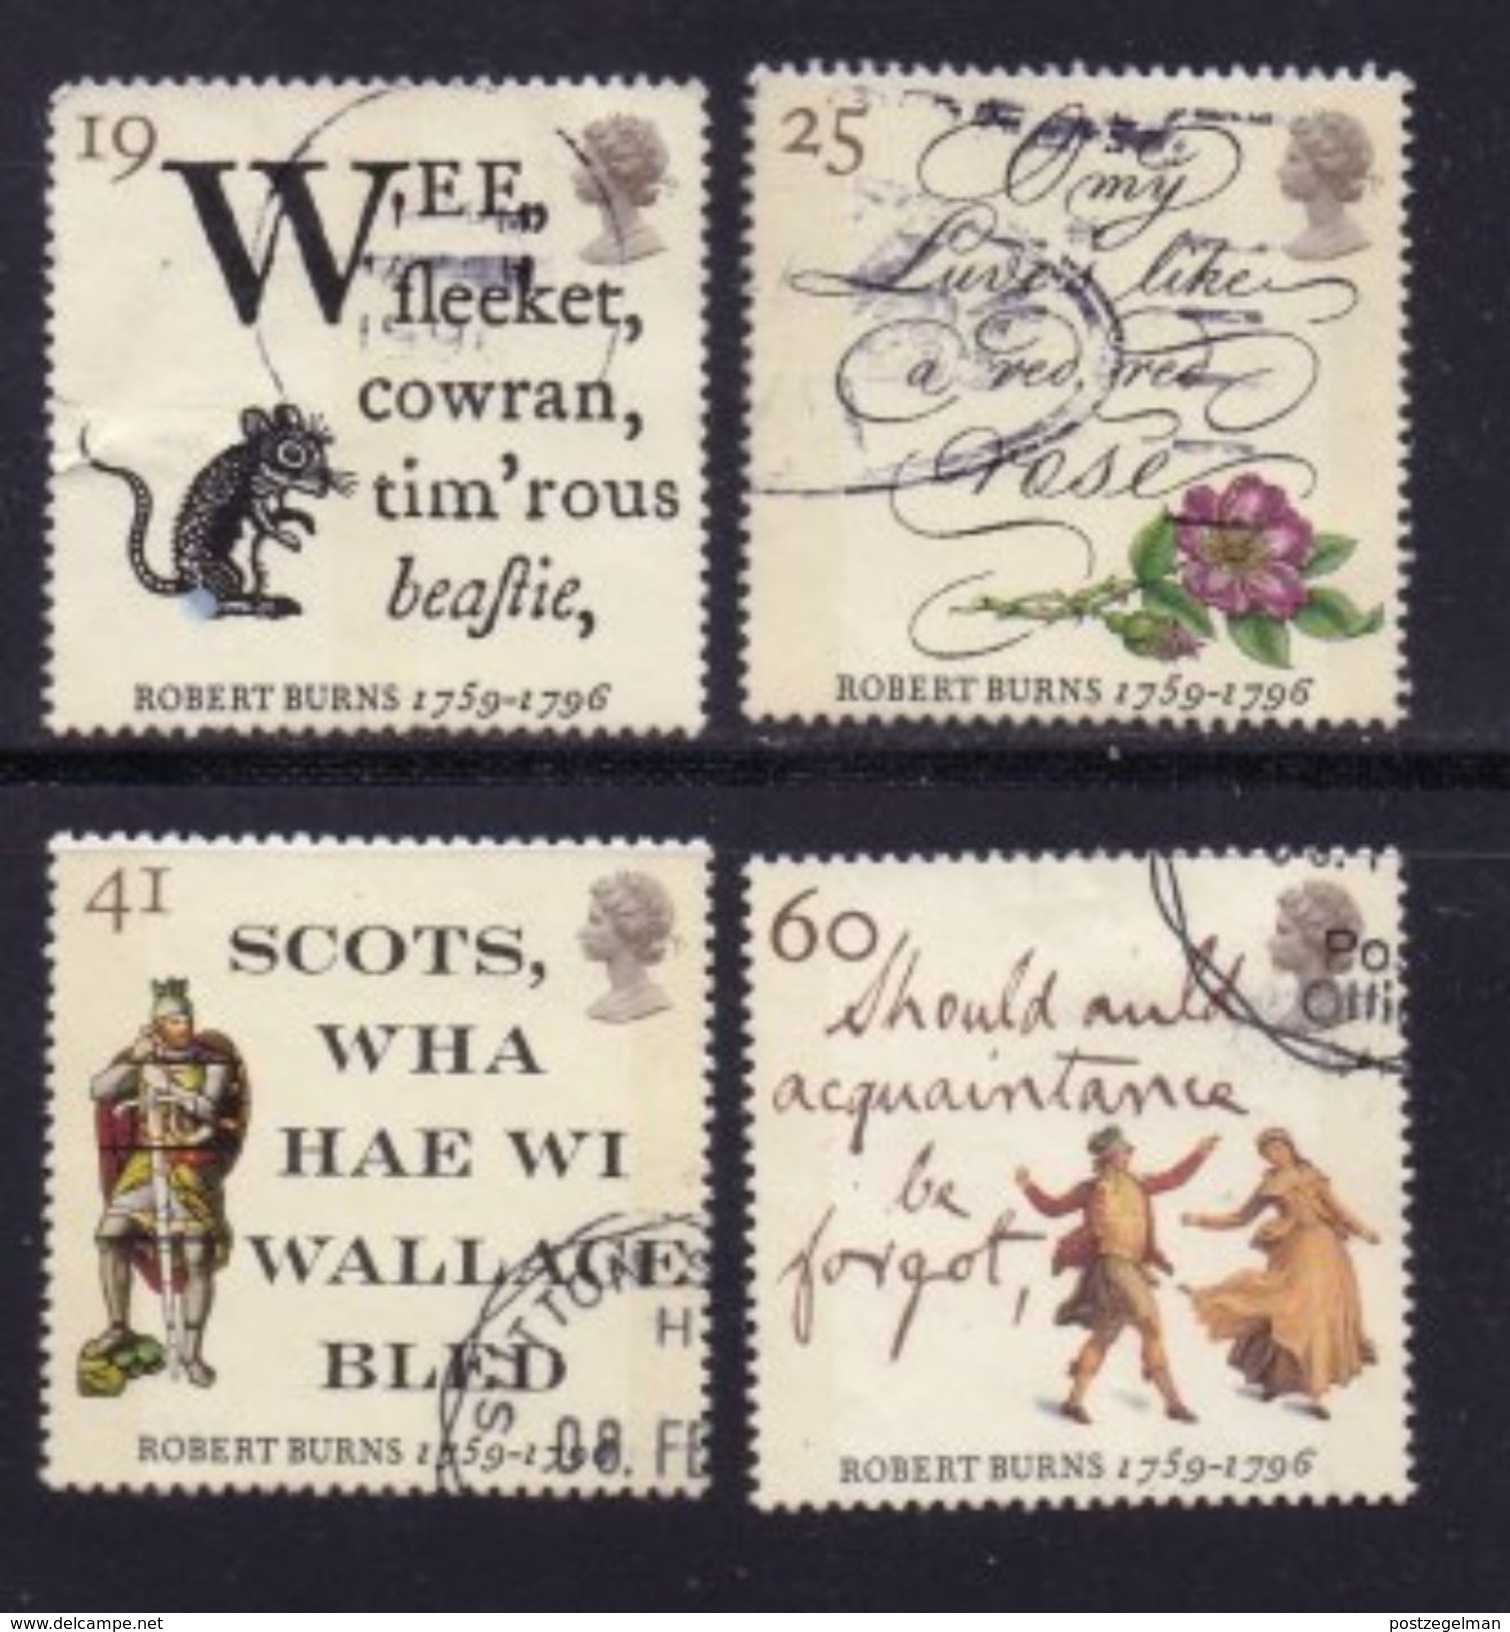 UK, 1996, Cancelled Stamp(s) , Robert Burns,  1601-1604  #14593 - Used Stamps